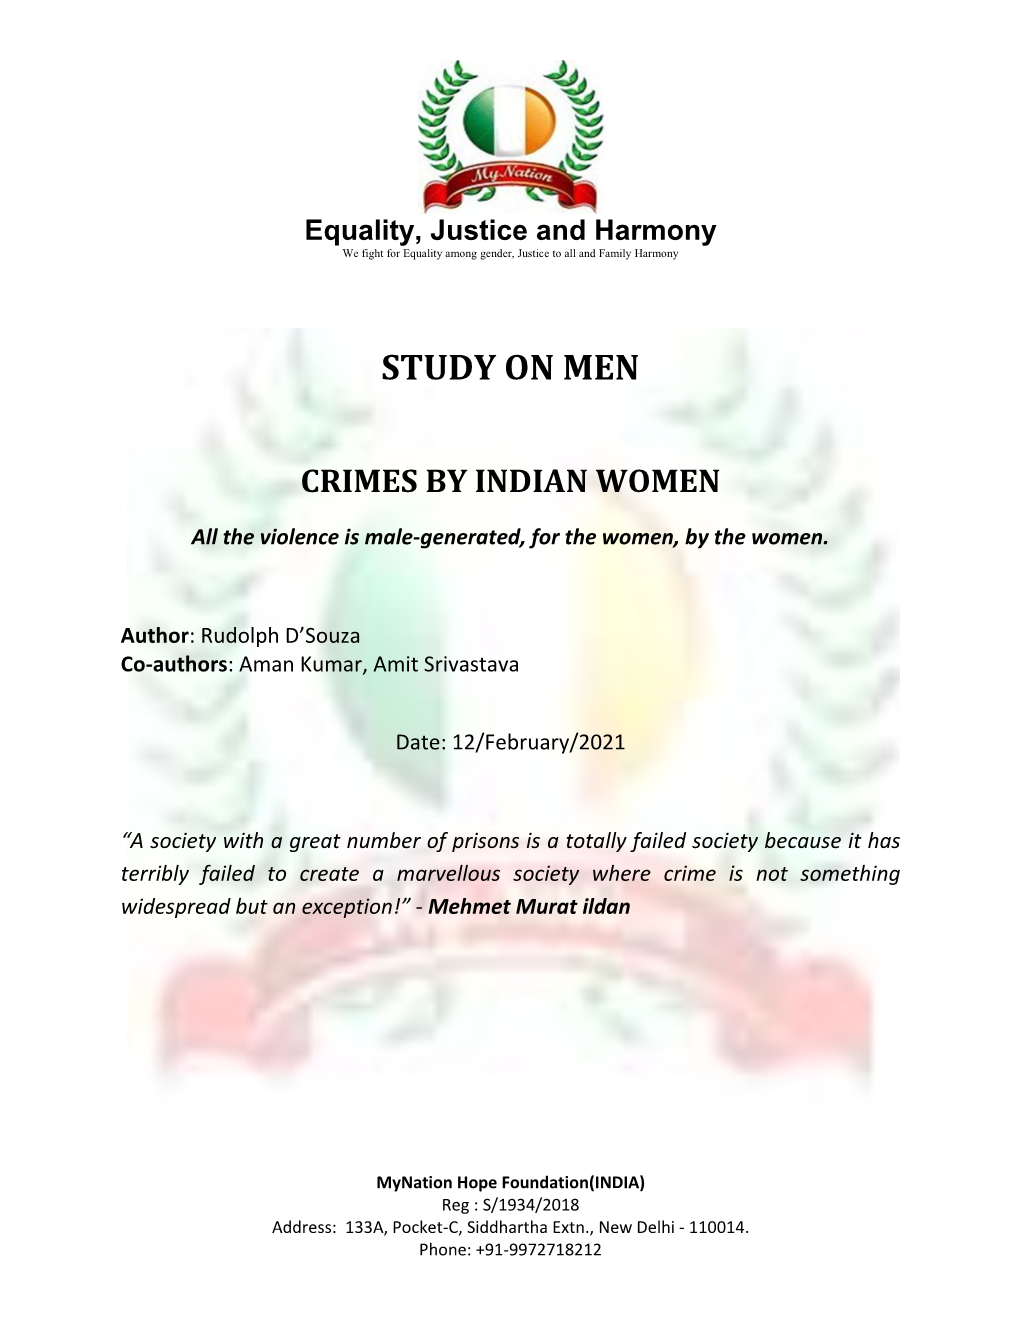 Crimes by Indian Women